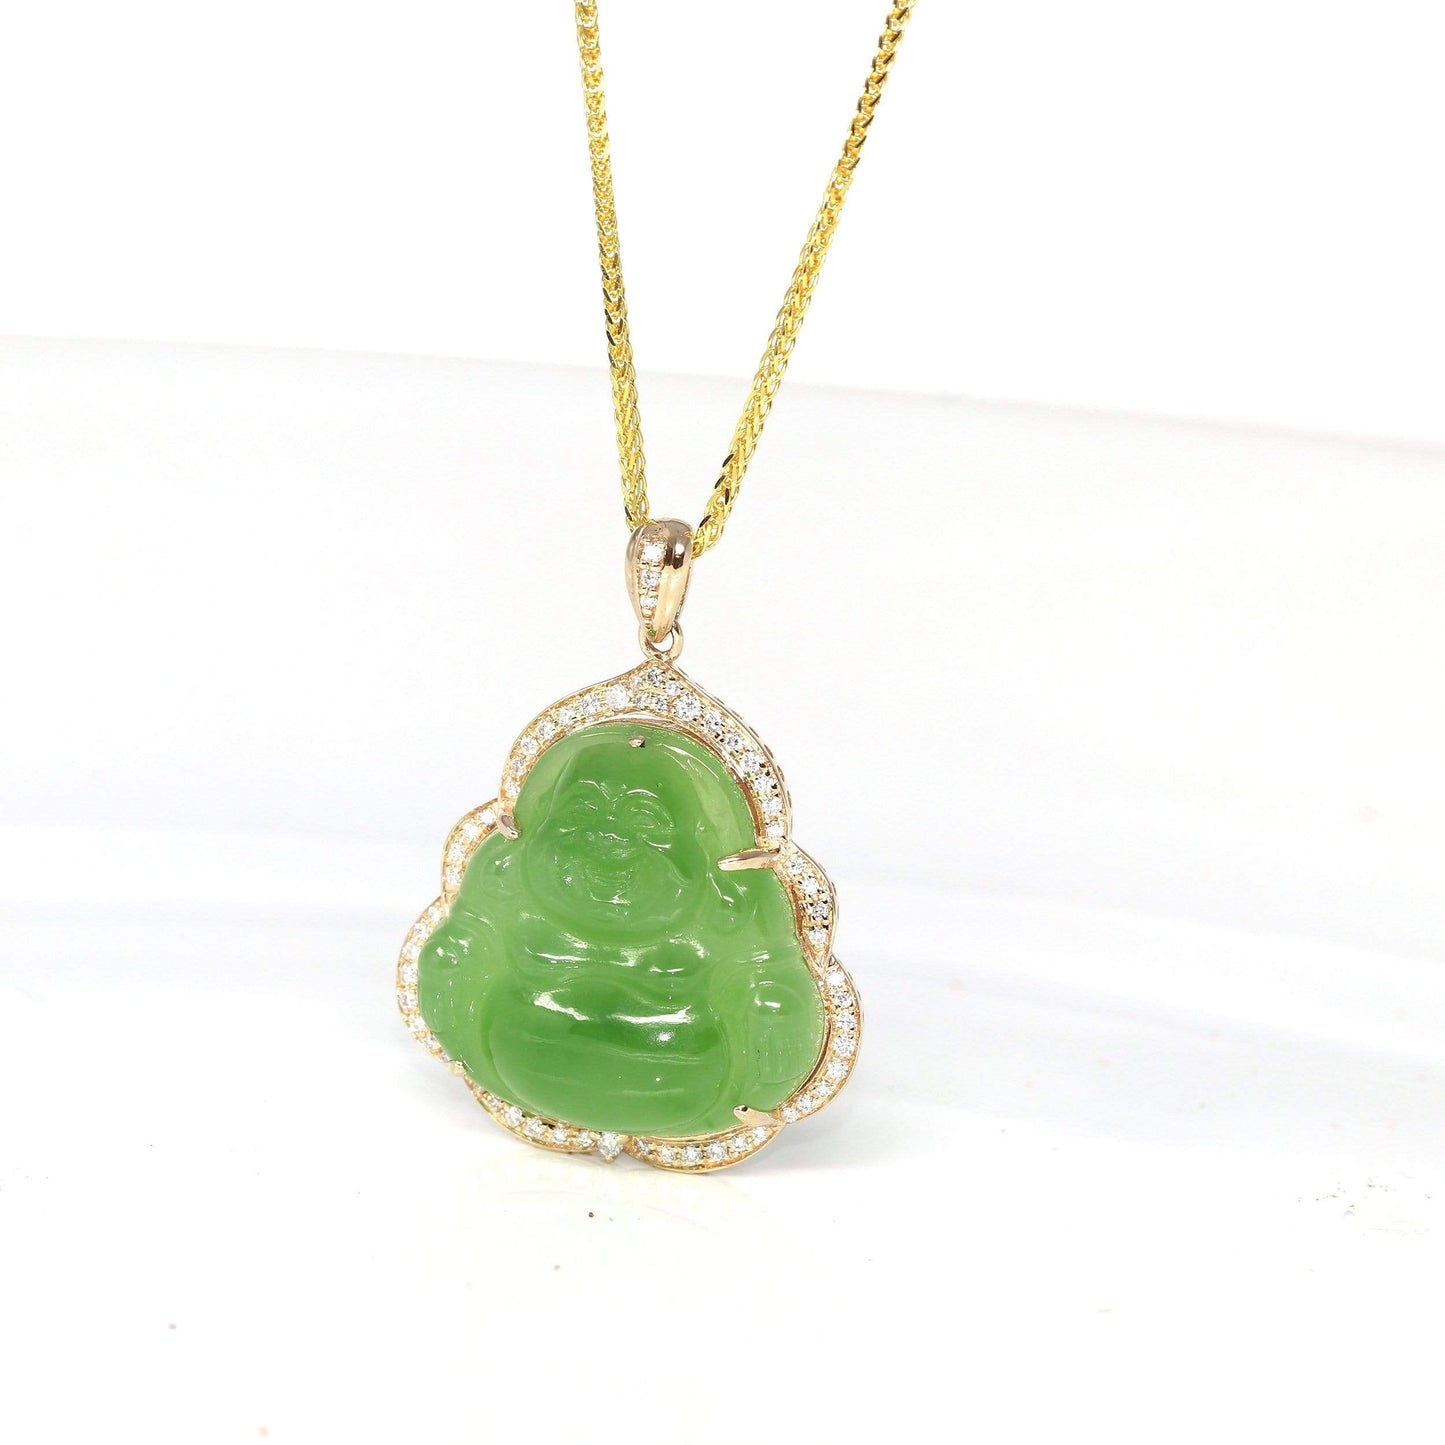 RealJade™ "Laughing Buddha" 14k Gold Genuine Nephrite Apple Green Jade with Diamonds Buddha Pendant Necklace High-end Collectable